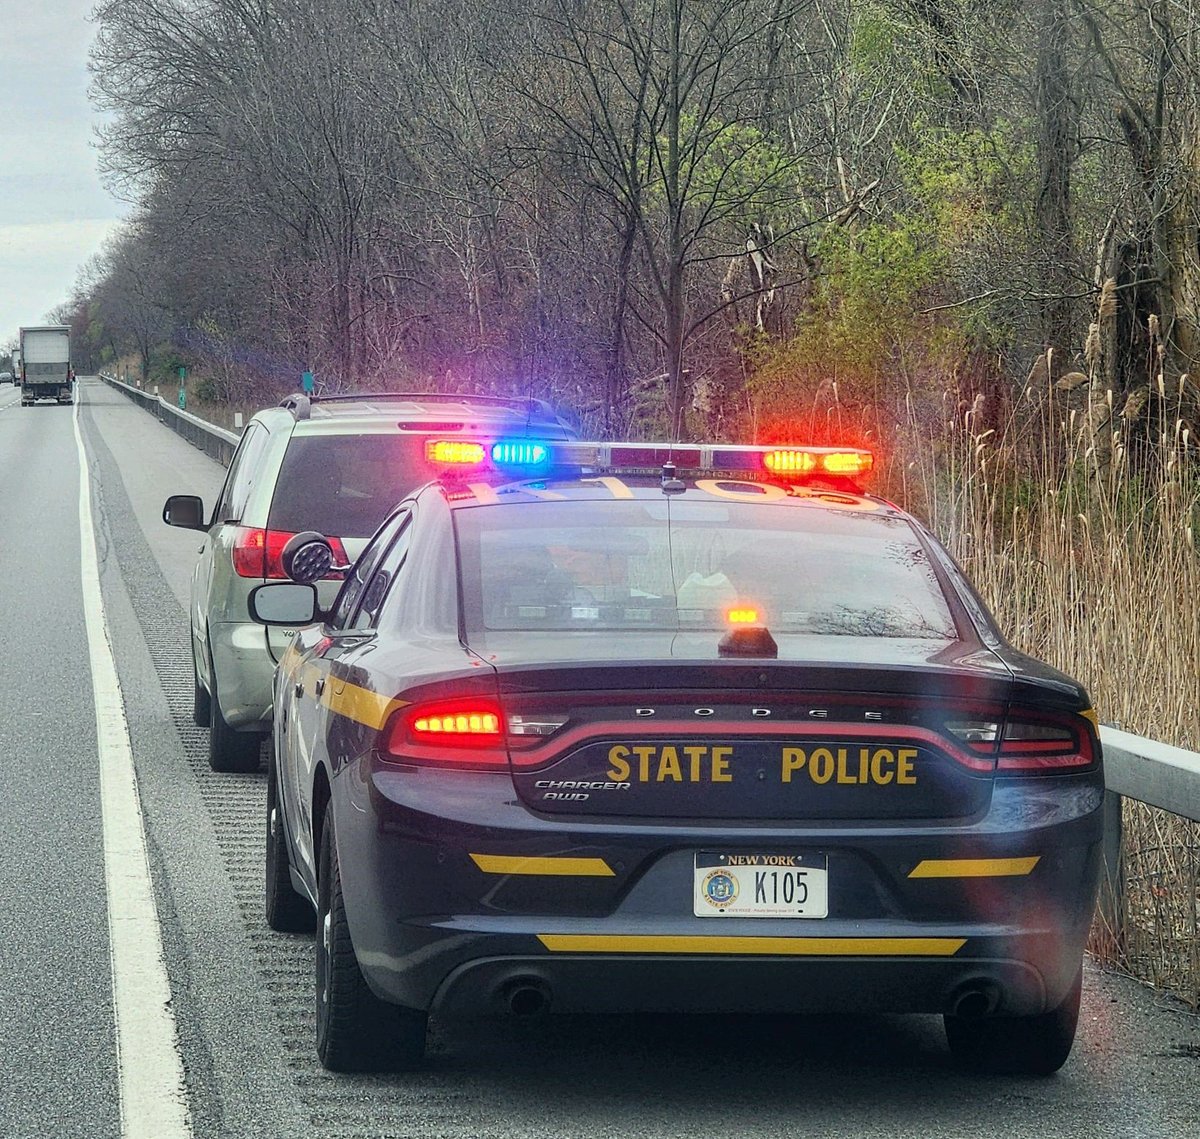 Troopers are in and around work zones helping our DOT workers during National Work Zone Awareness Week. Please slow down, obey all traffic control, and do your part to make sure everyone gets home safe. nwzaw.org